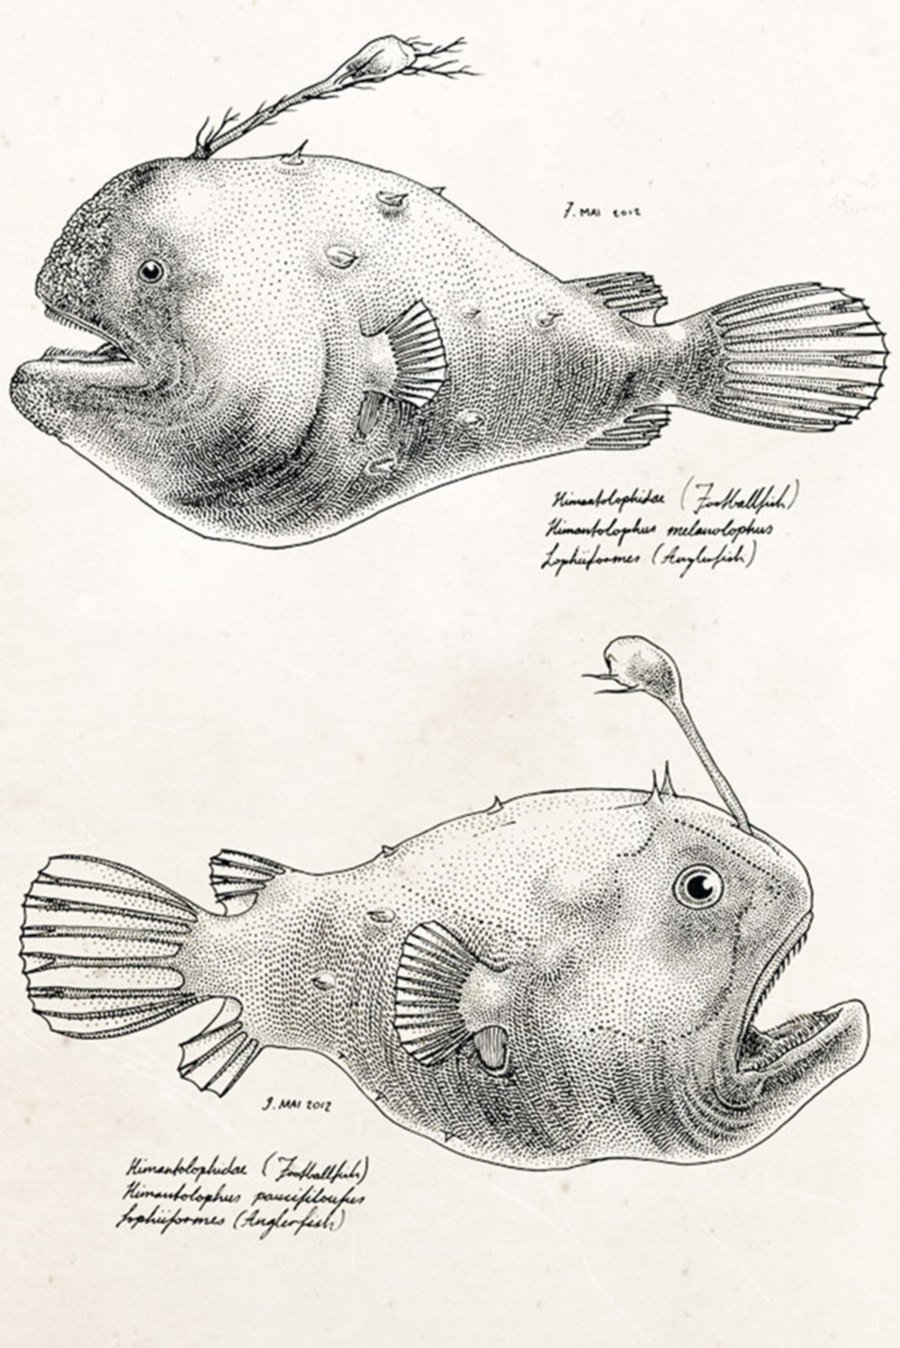 Left: Illustrator Jared Muralt has garnered a large following from all over the world mainly due to his trademark stippling technique and diaristic sketches in his notebook. 